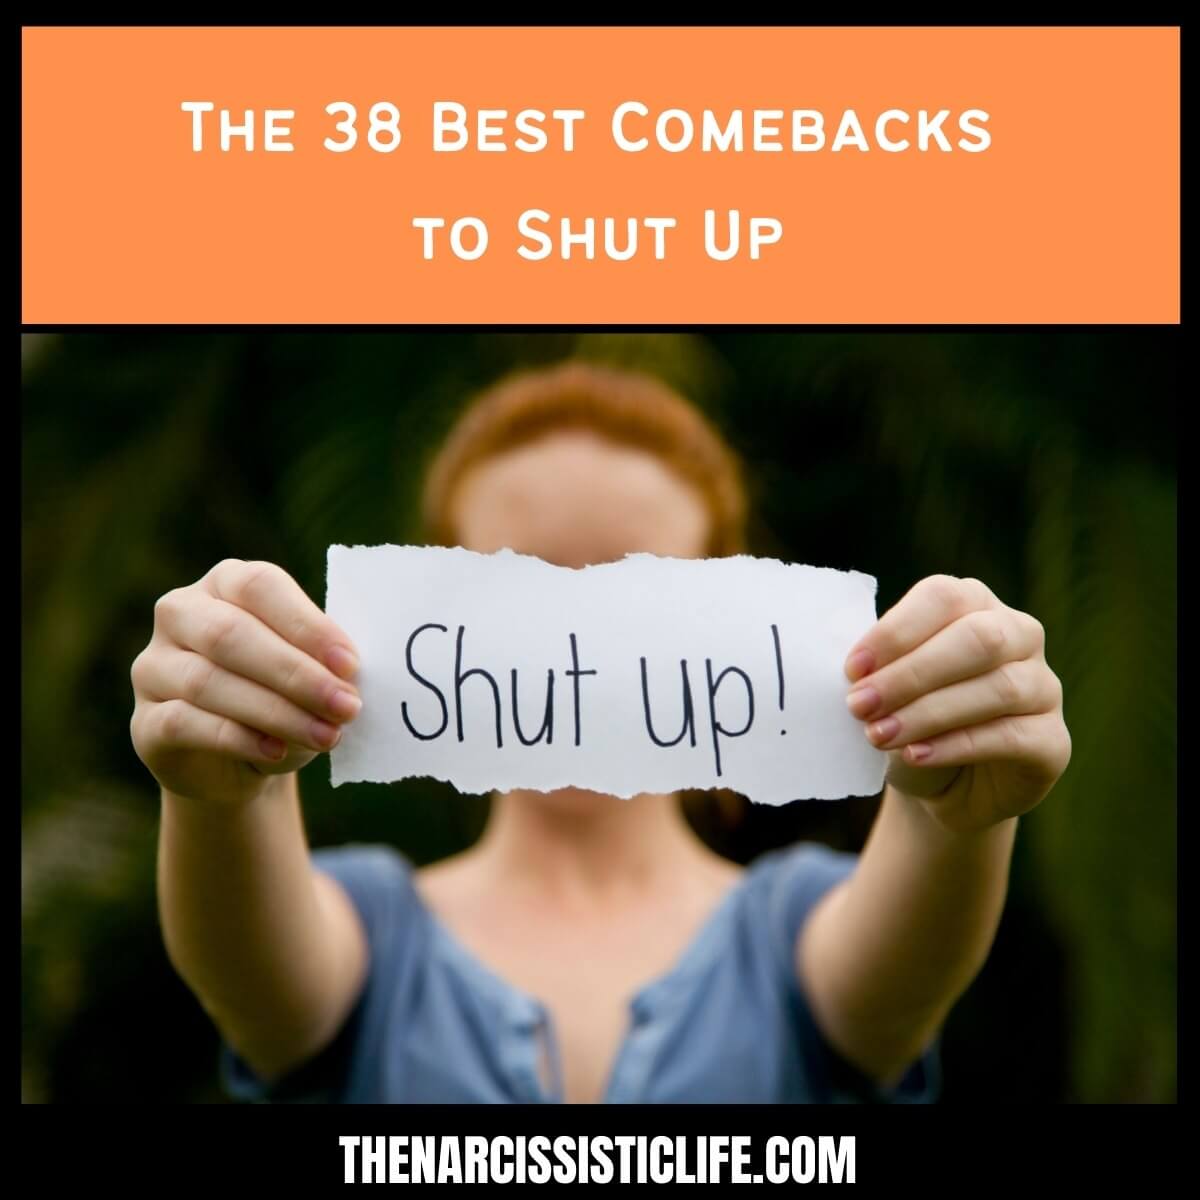 The 38 Best Comebacks to Shut Up - The Narcissistic Life